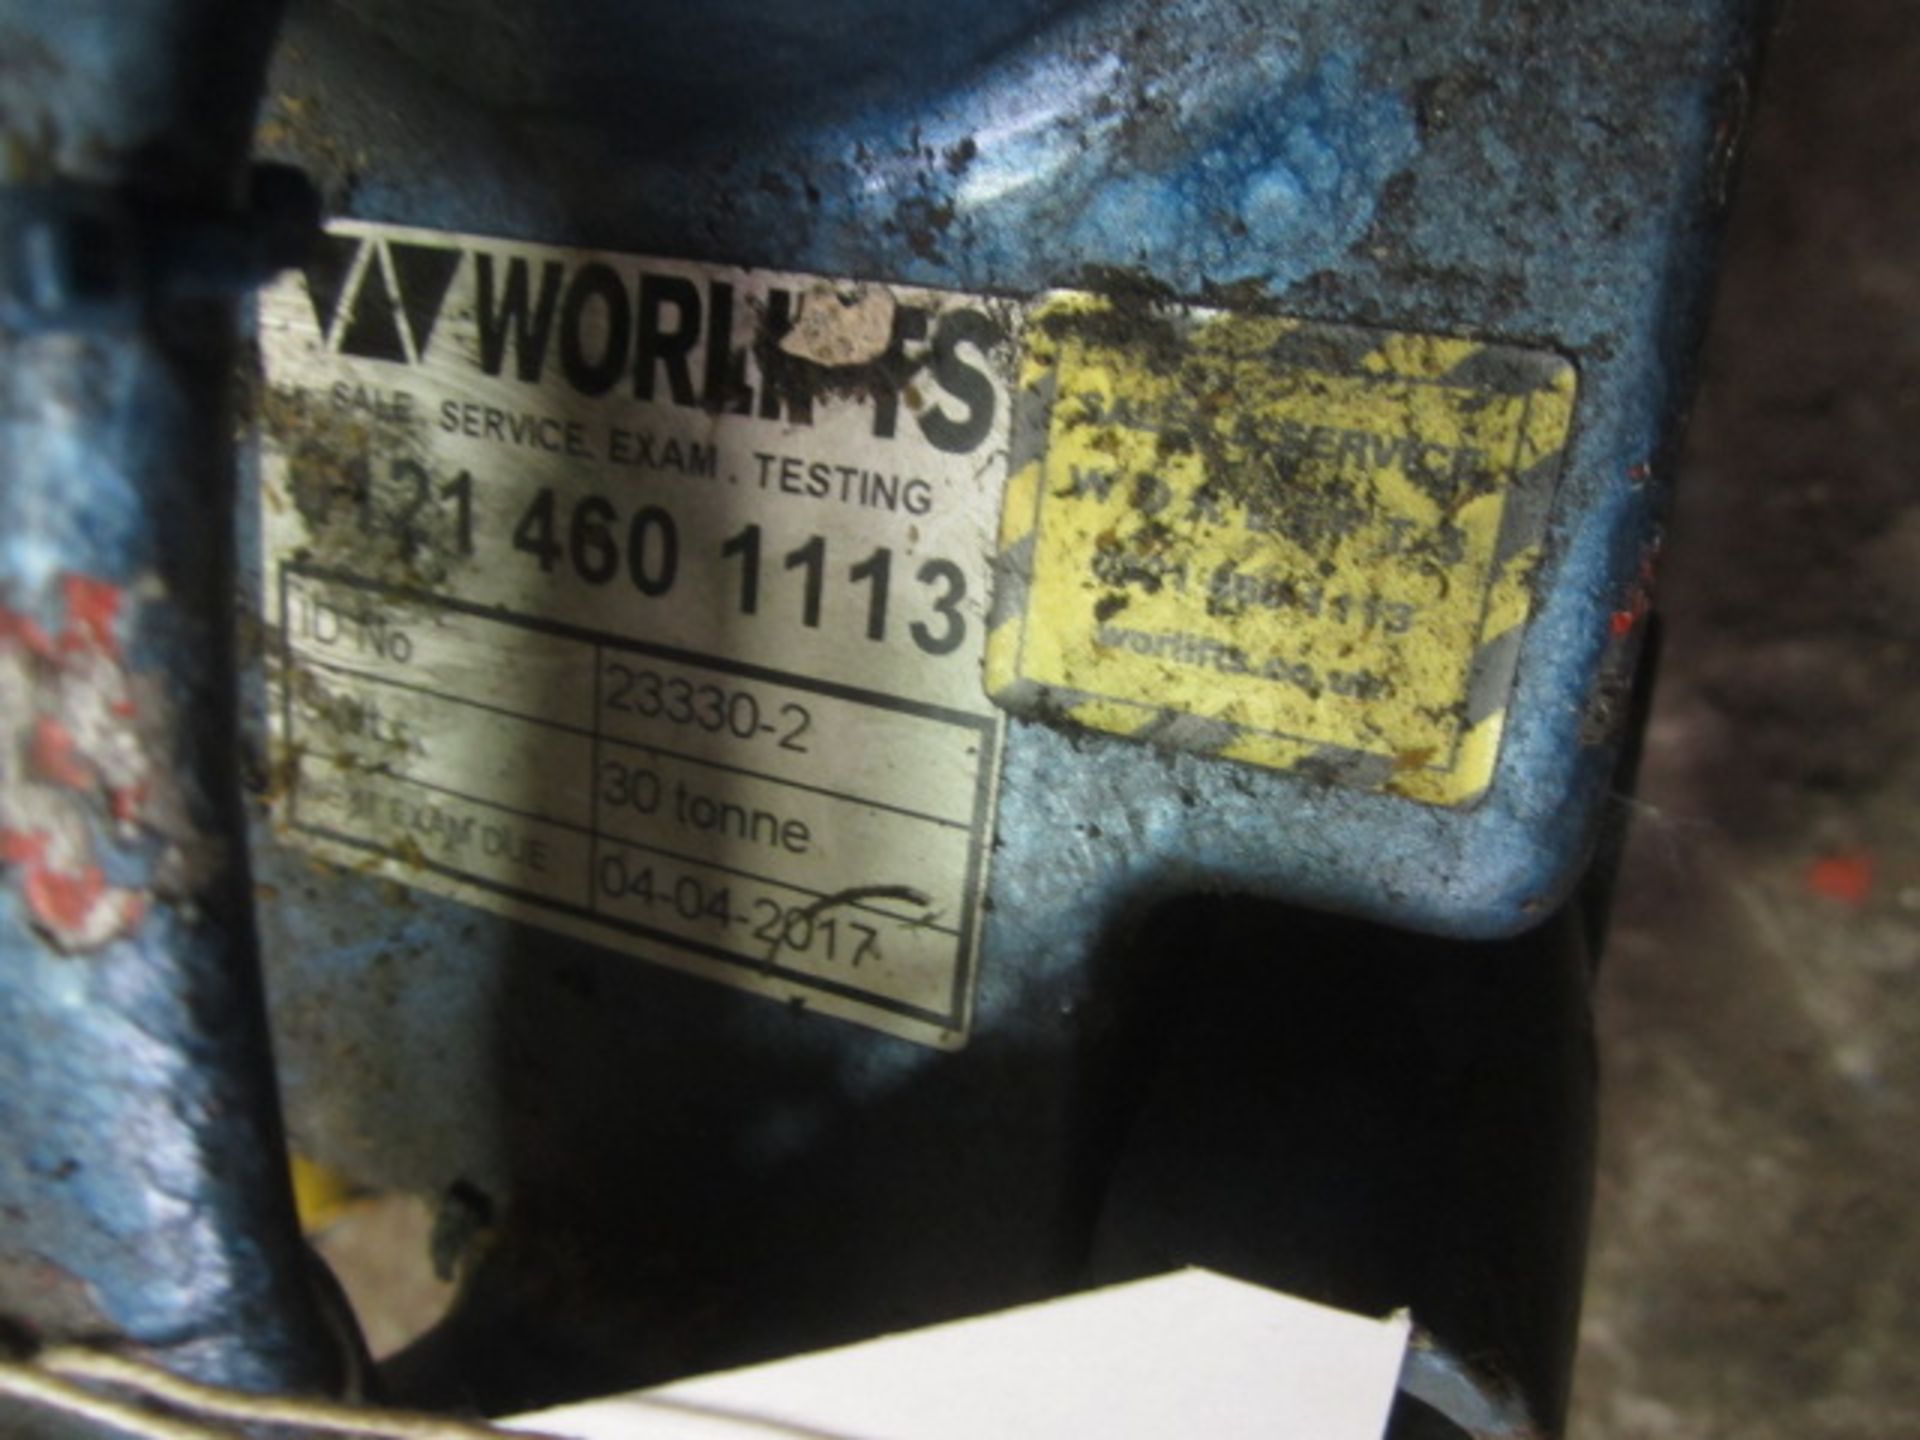 Worlift 30 tonner hydraulic toe jack, ID 23330-2 NB: This item has no record of Thorough - Image 3 of 4